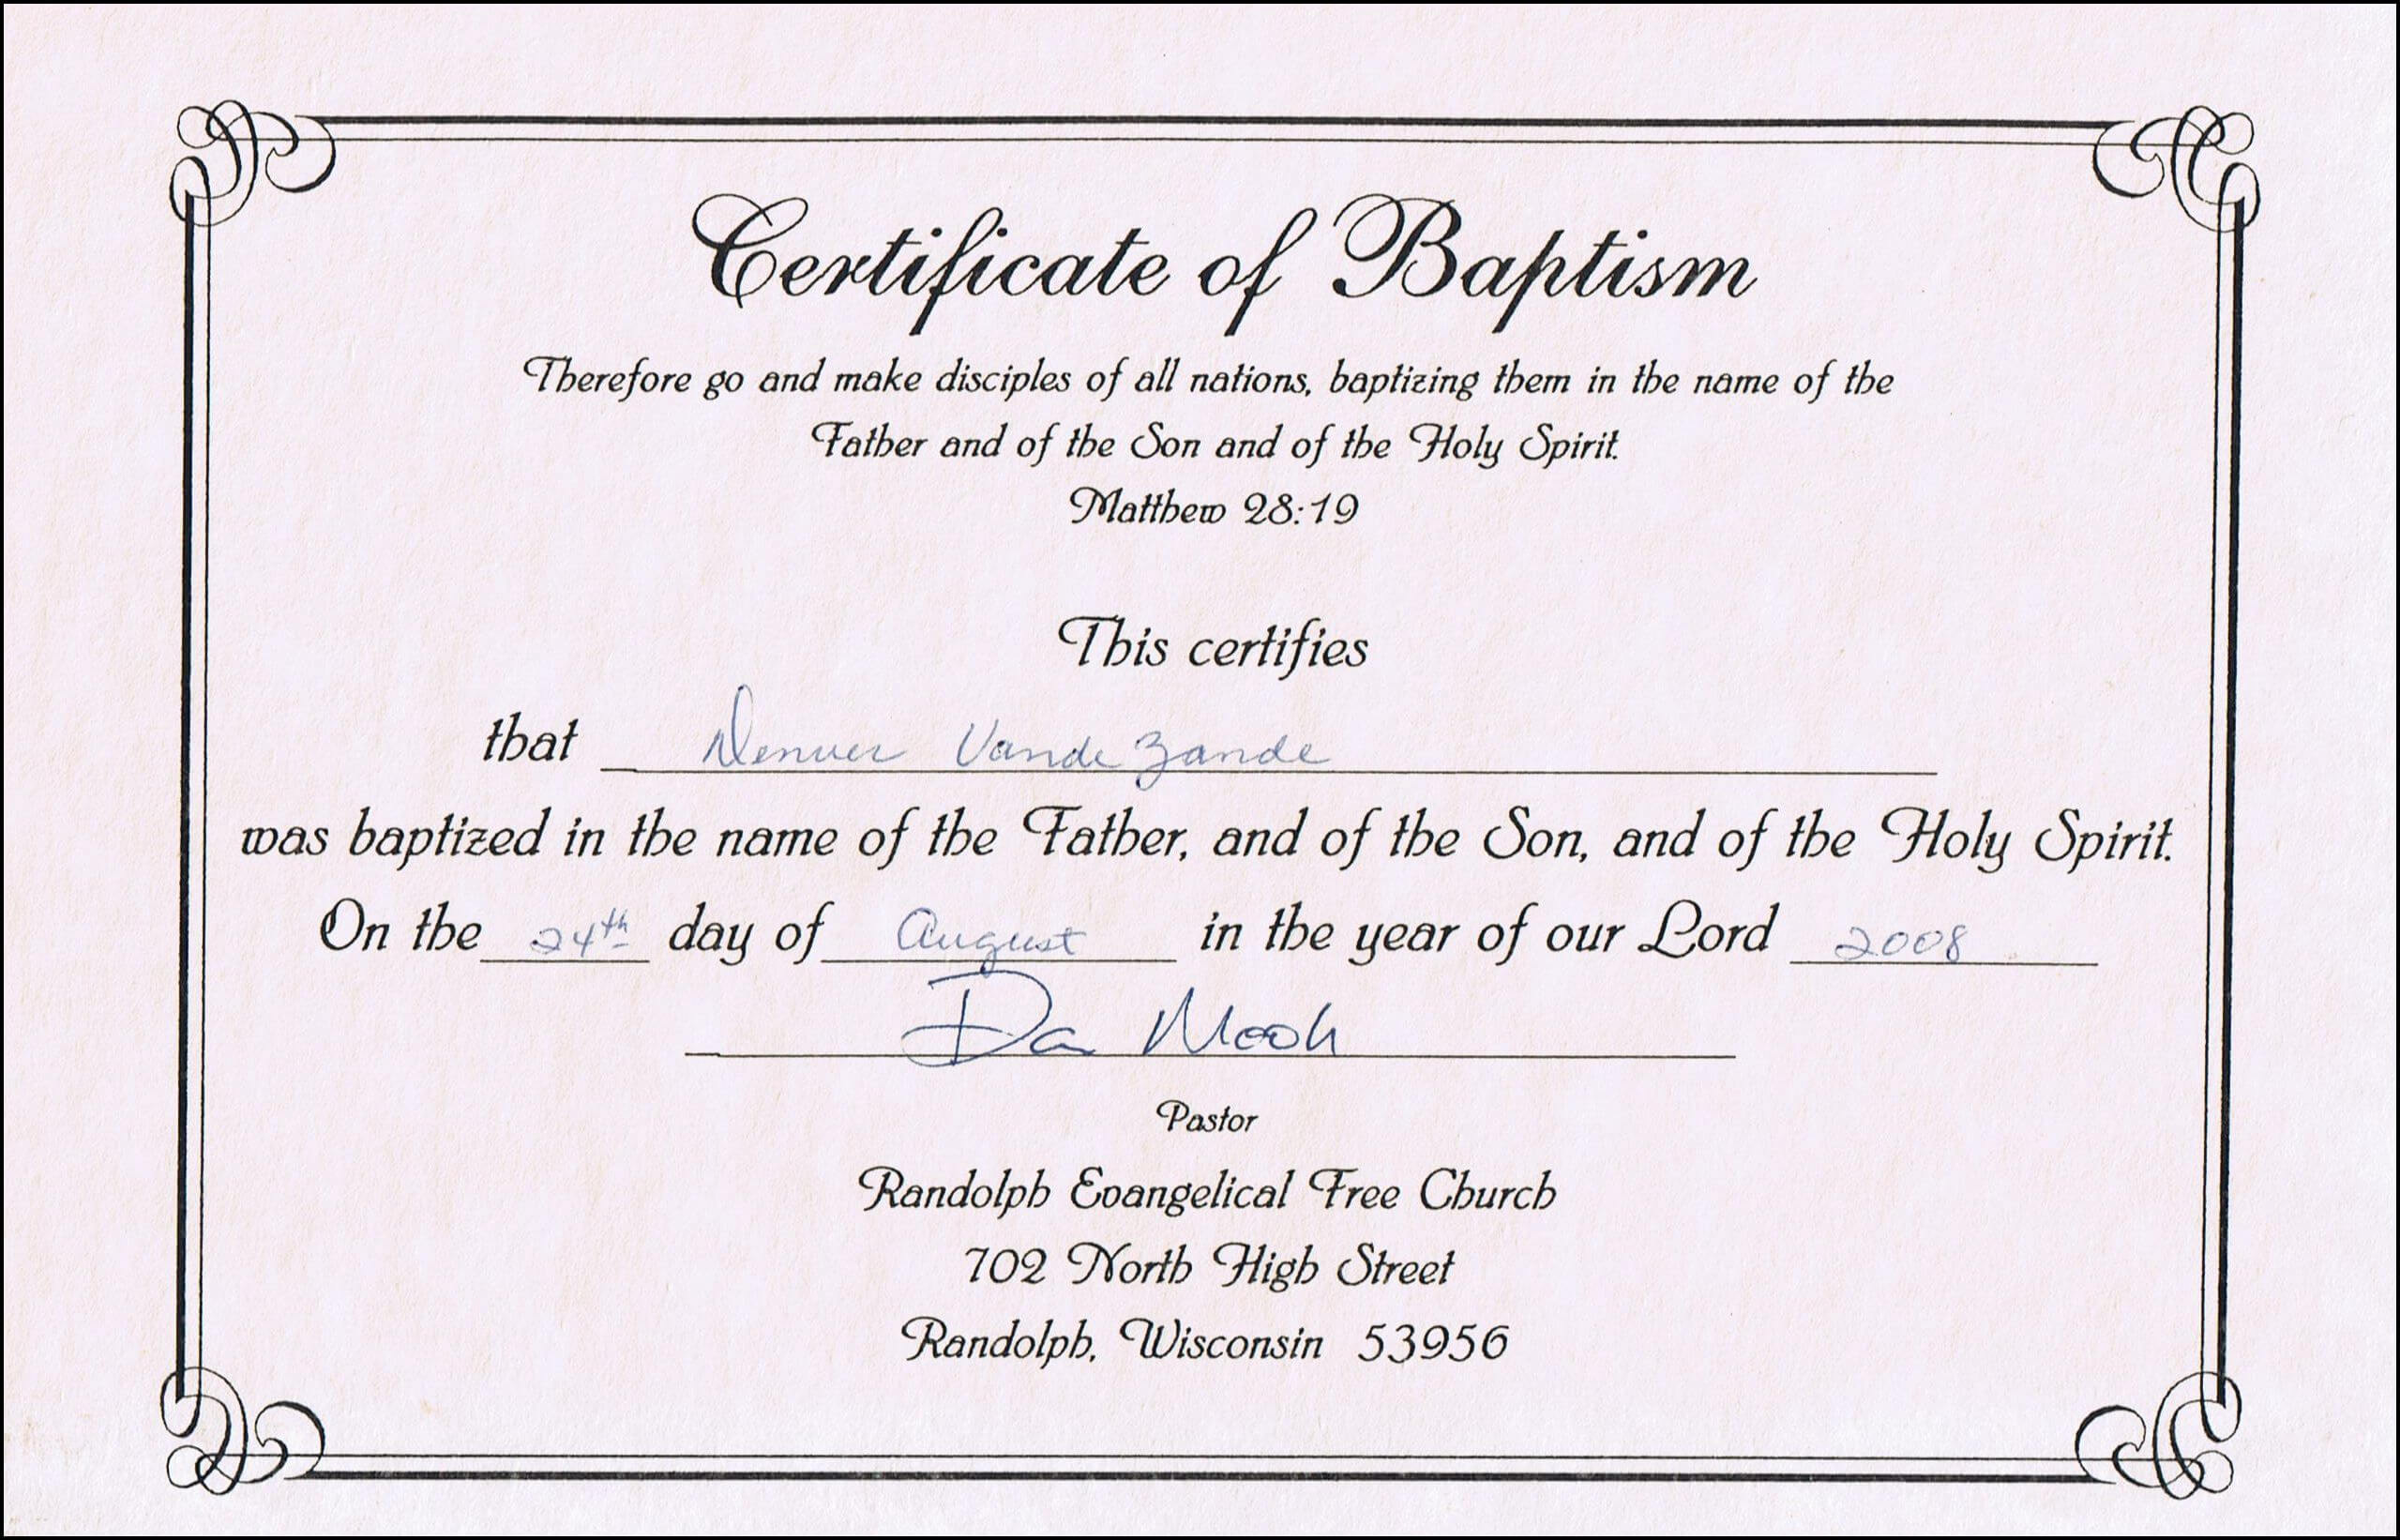 Baptism Certificate Templates For Word | Aspects Of Beauty With Christian Baptism Certificate Template